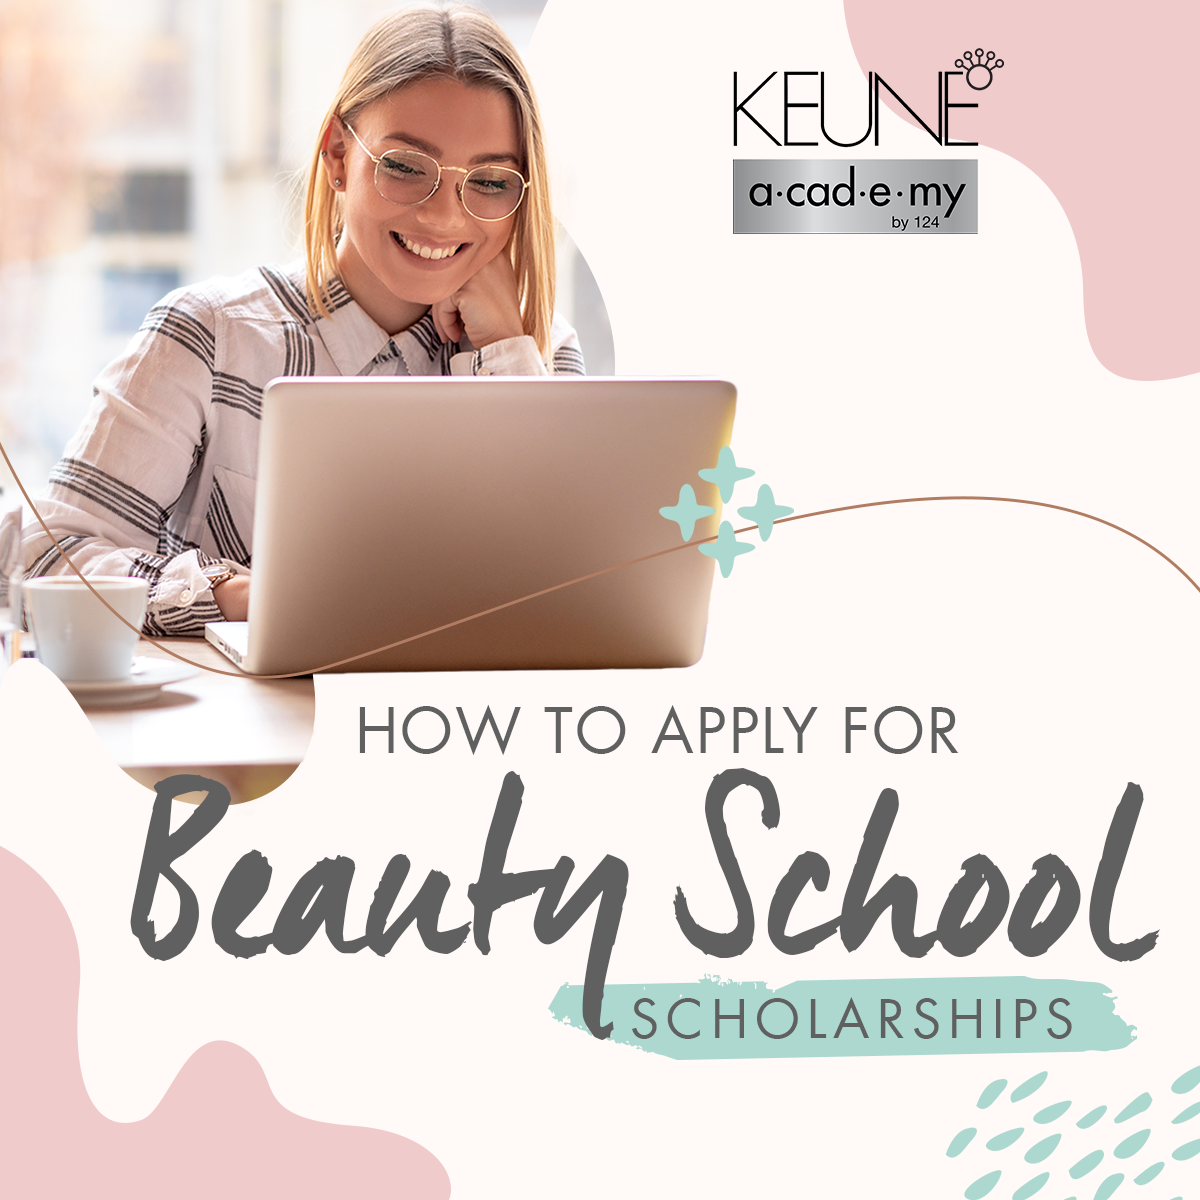 How to Apply for Beauty School Scholarships?